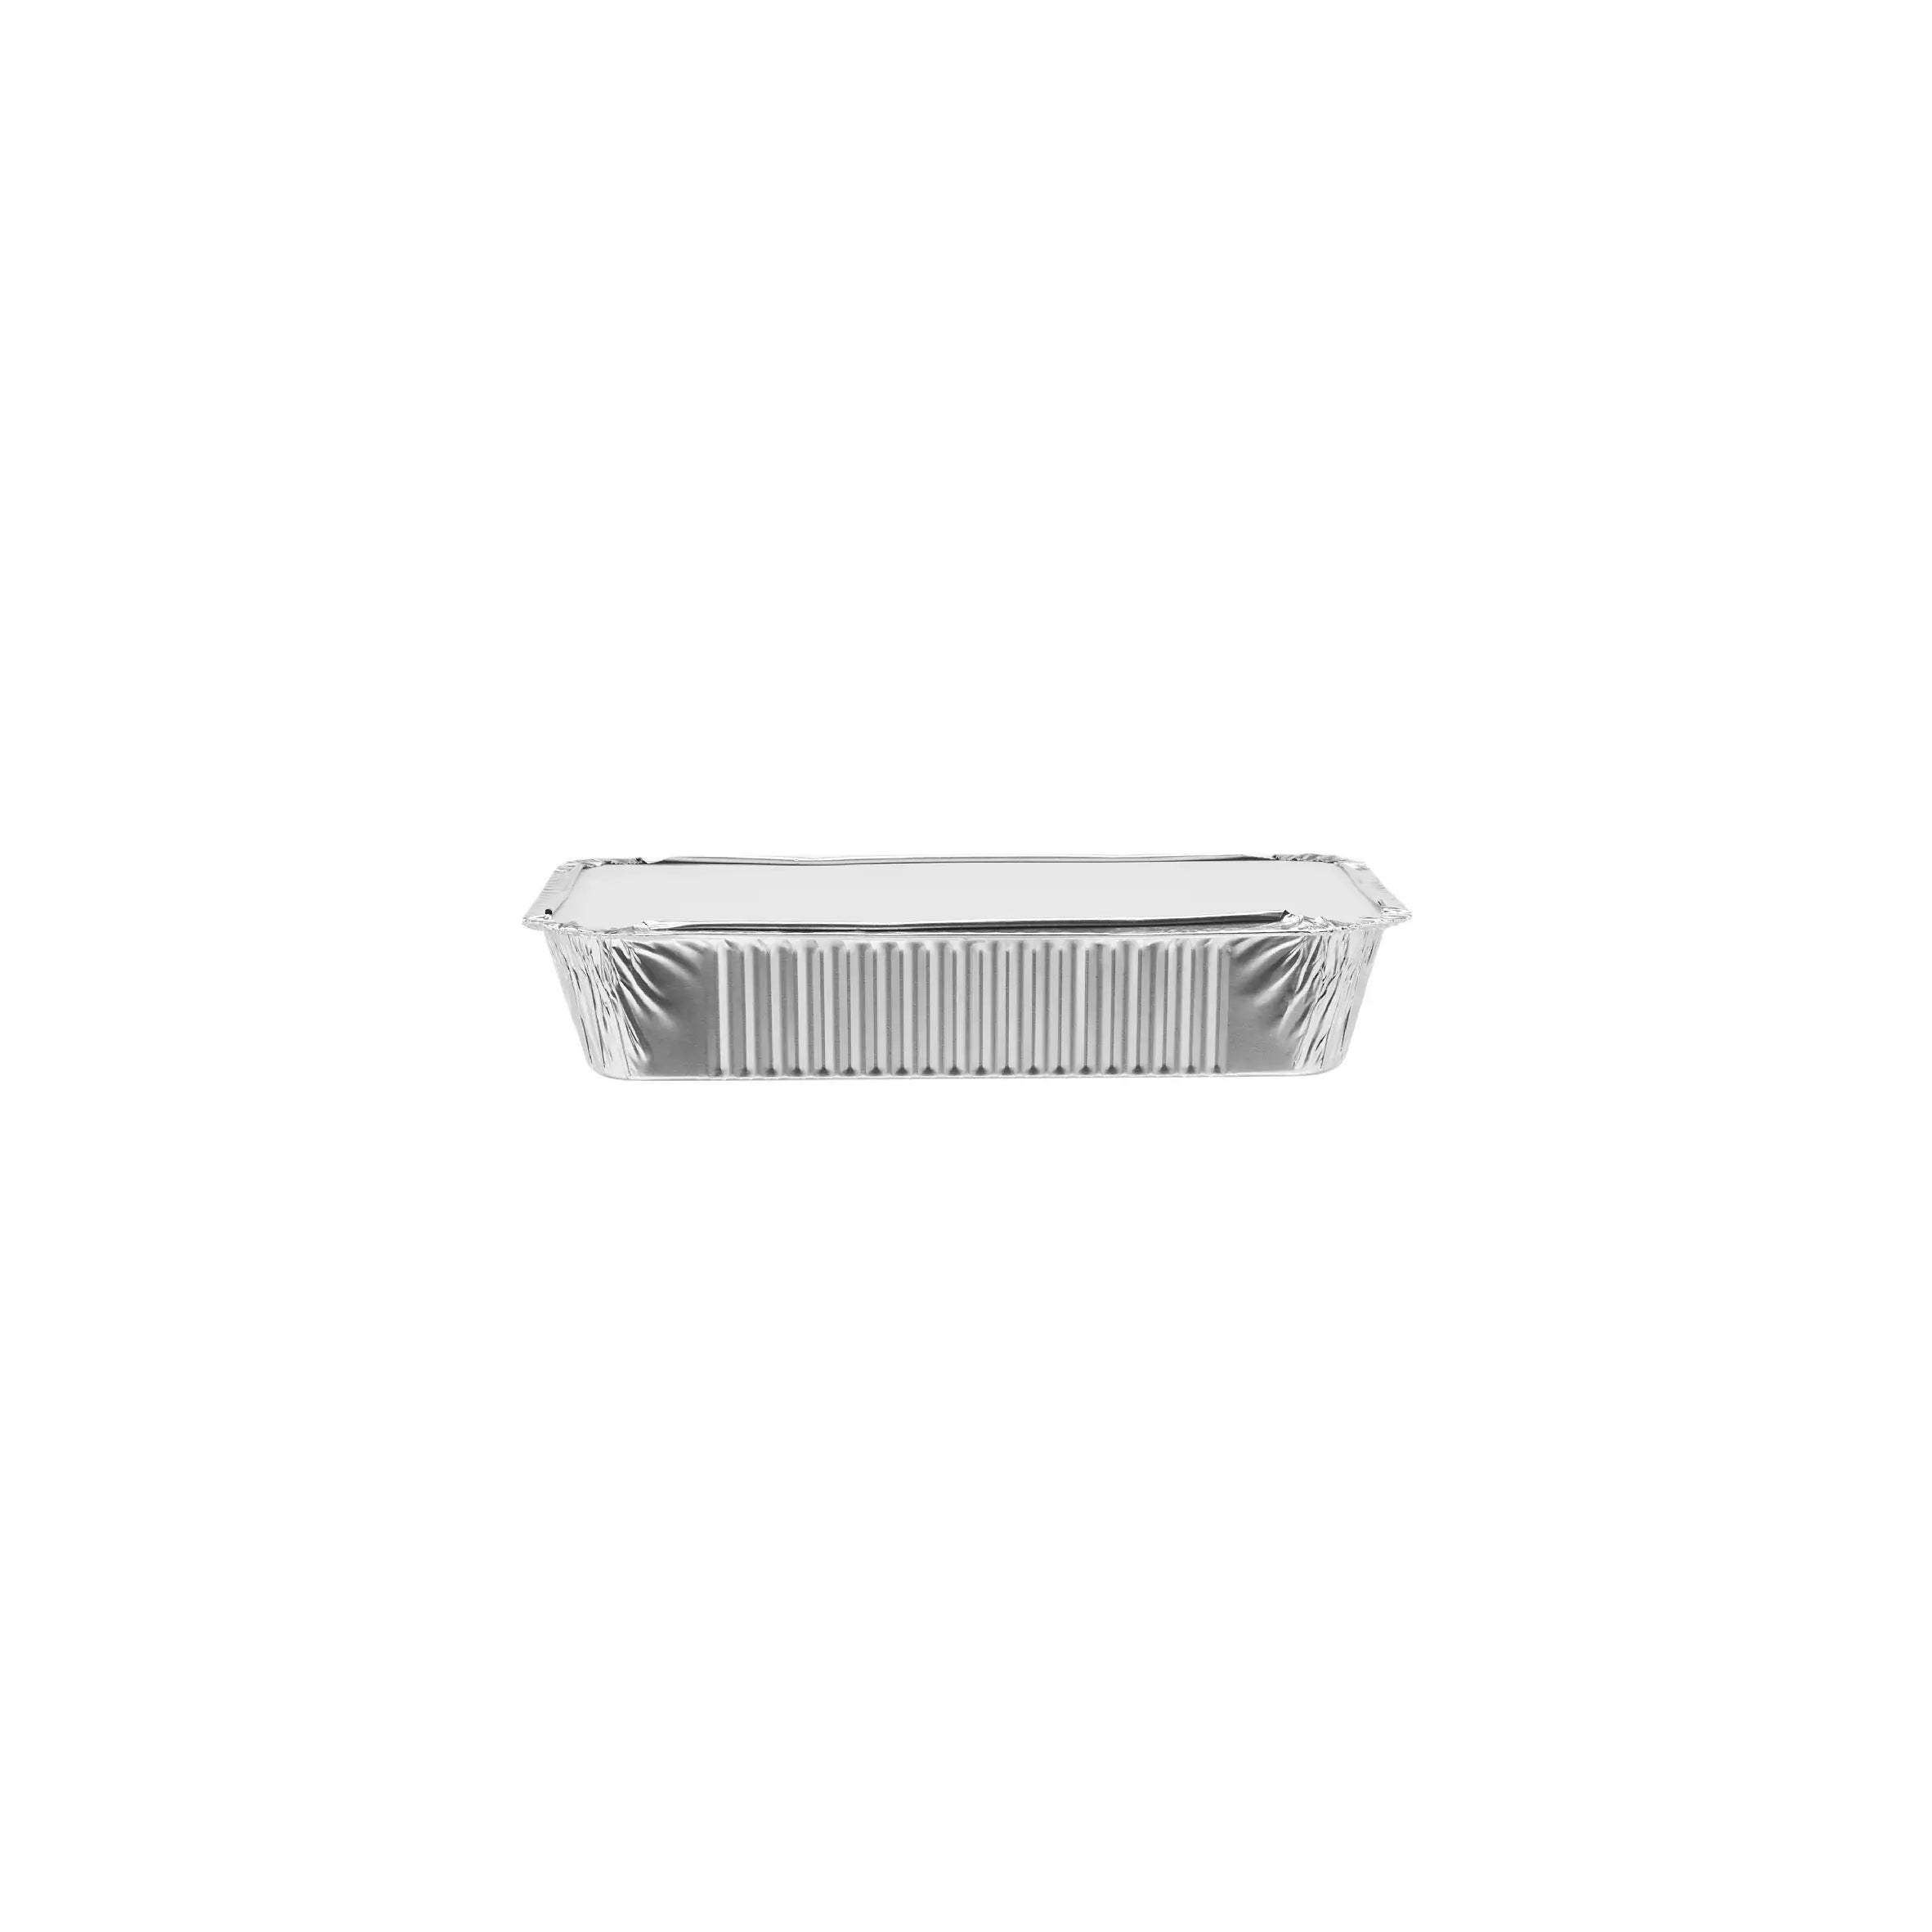 Aluminum Containers with Lid 50 Pieces Pack - hotpackwebstore.com